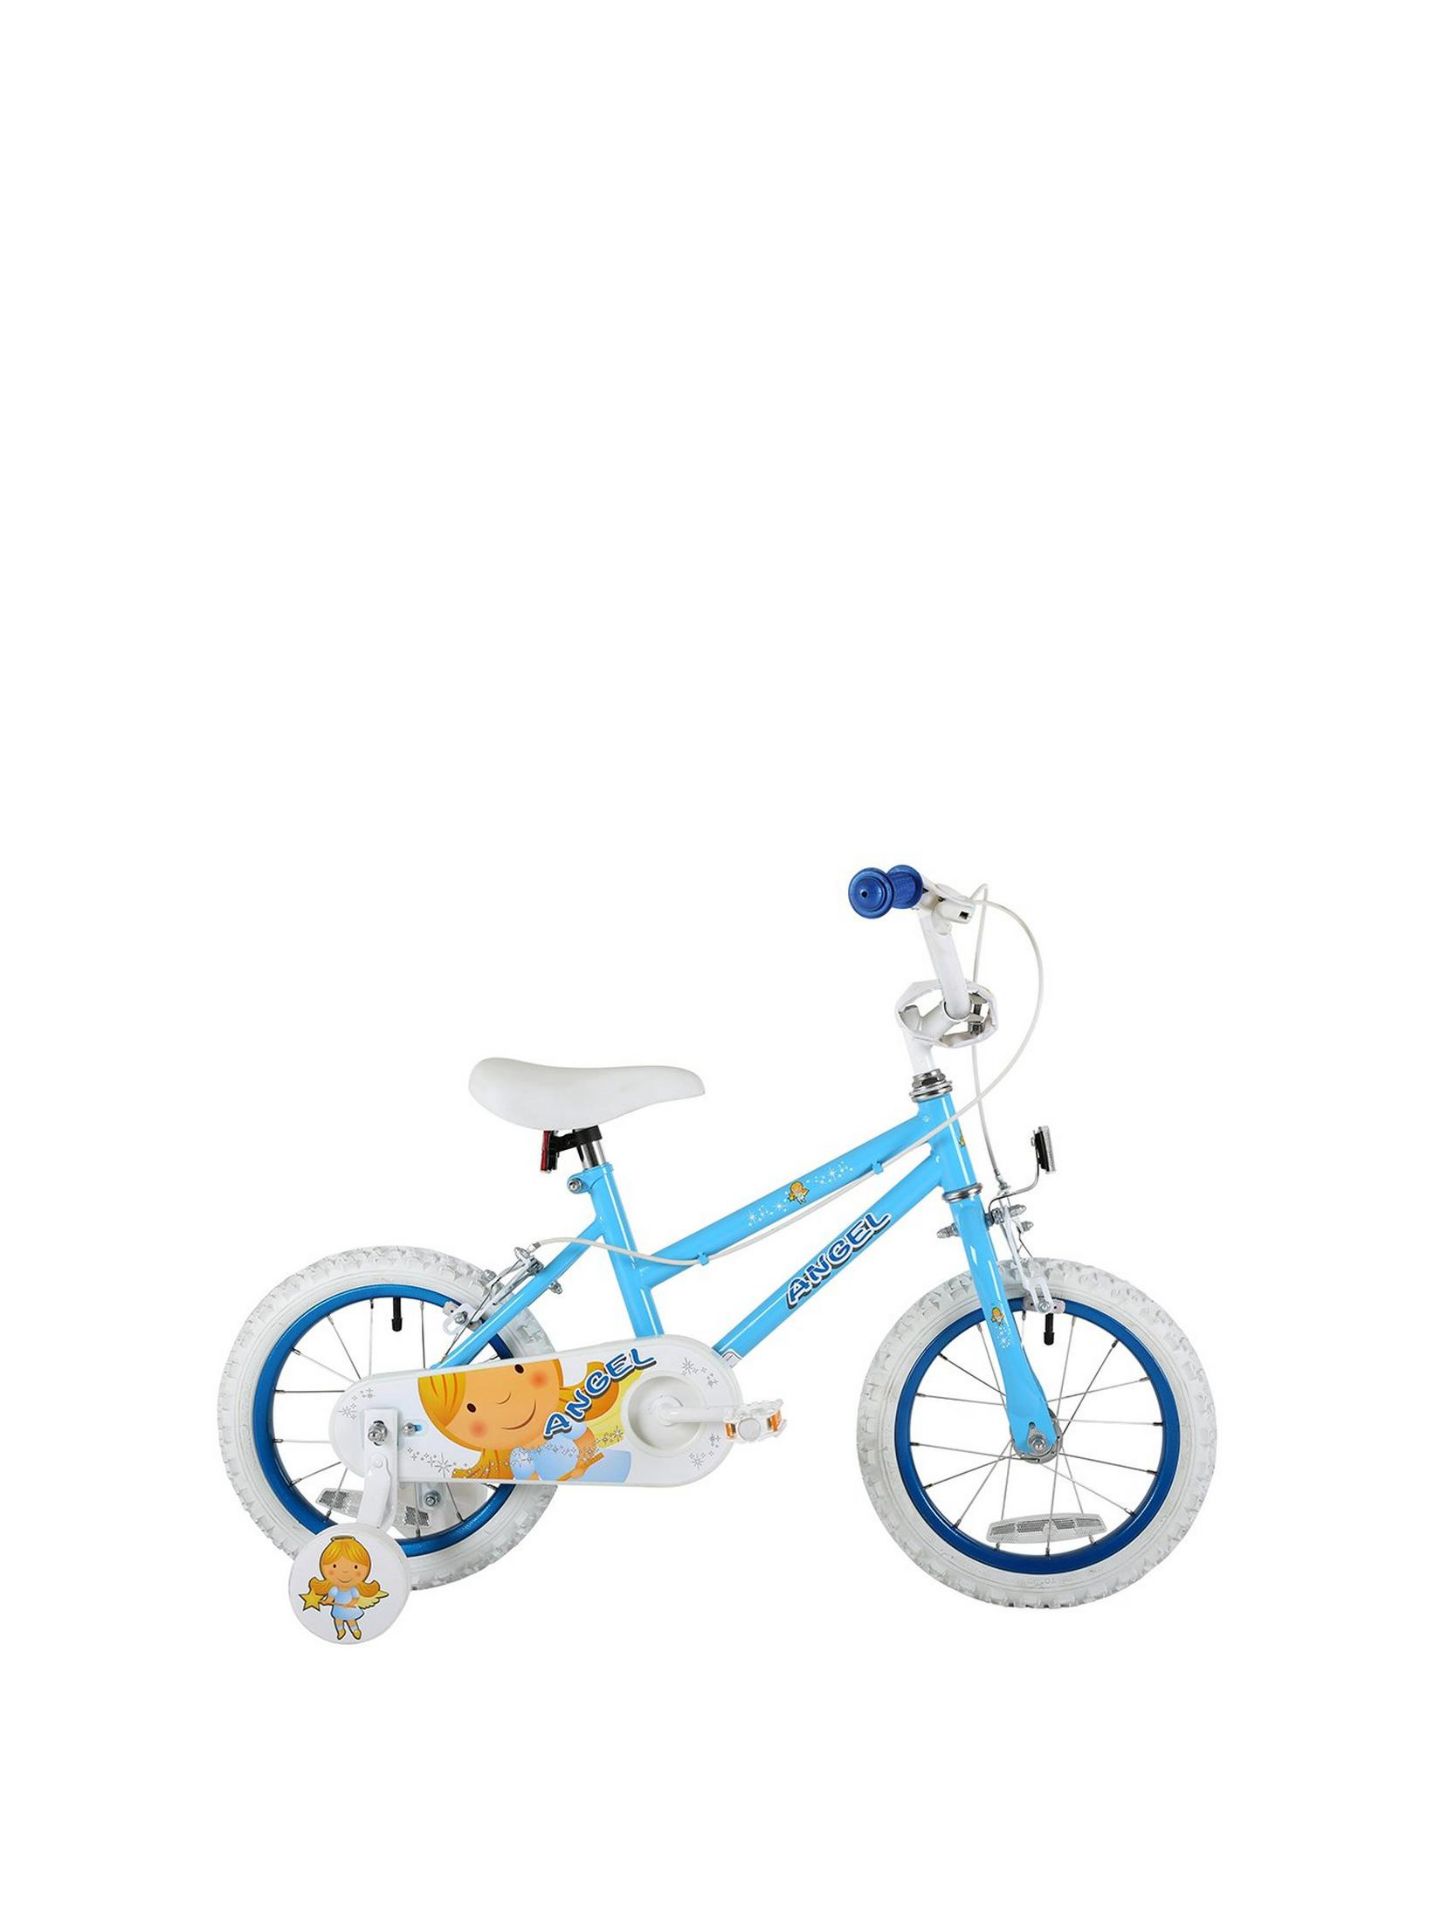 New & Boxed Sonic Angel Girls 14 Inch Bike. RRP £149.99. Introducing the all new Angel 14 inch